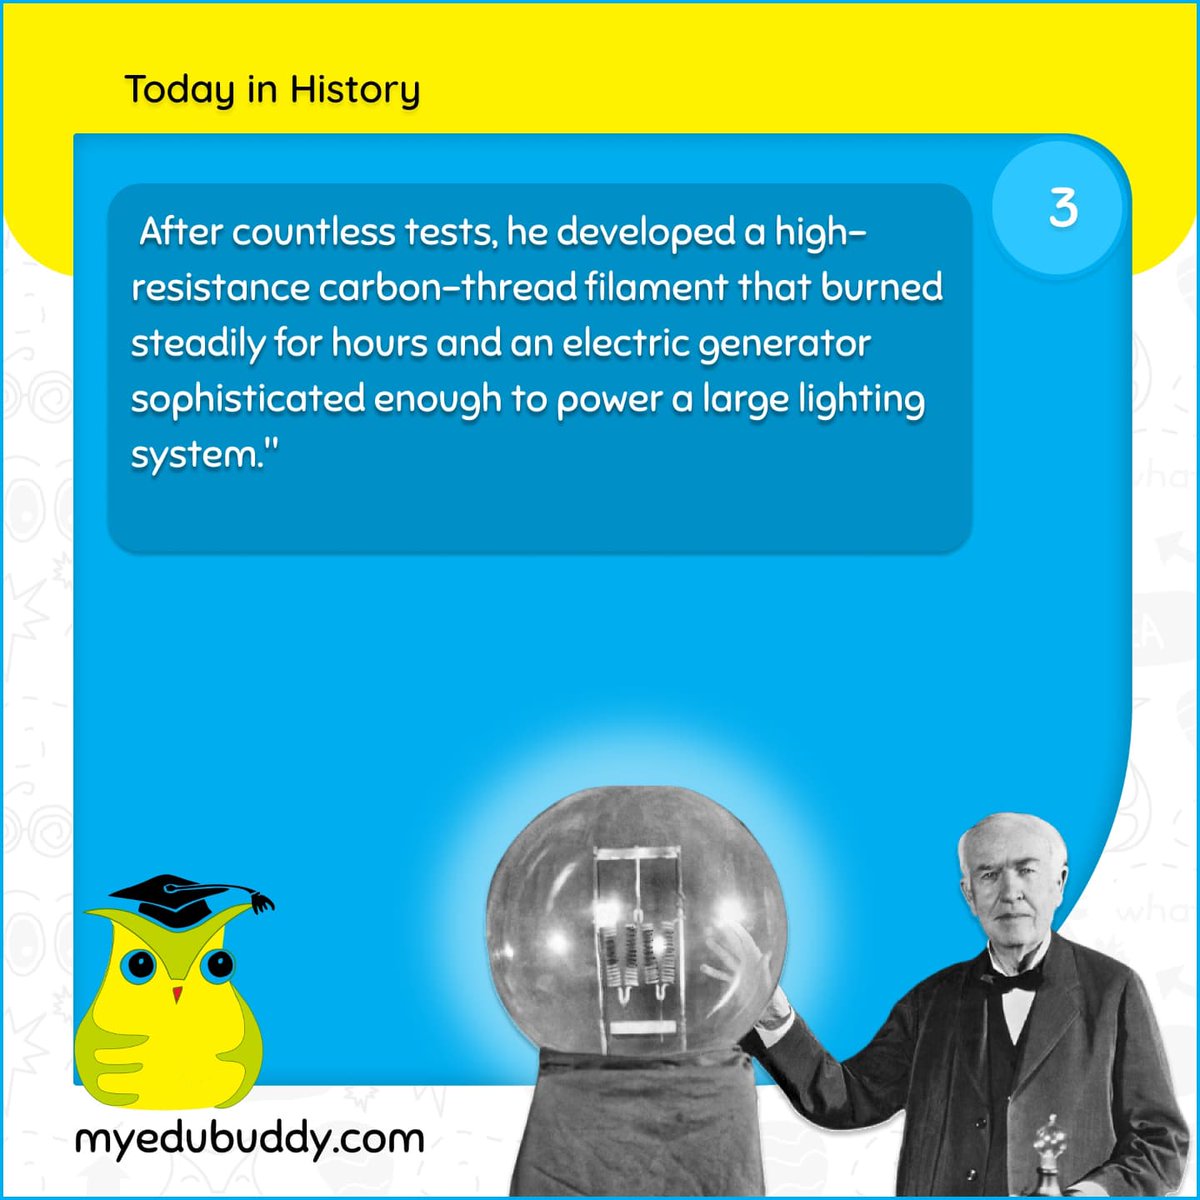 In the first public demonstration of his incandescent lightbulb, American inventor Thomas Alva Edison lights up a street in Menlo Park, New Jersey

#myedubuddy #todayinhistory #newpost #thomasedison #americaninventor #incandescentlightbulb